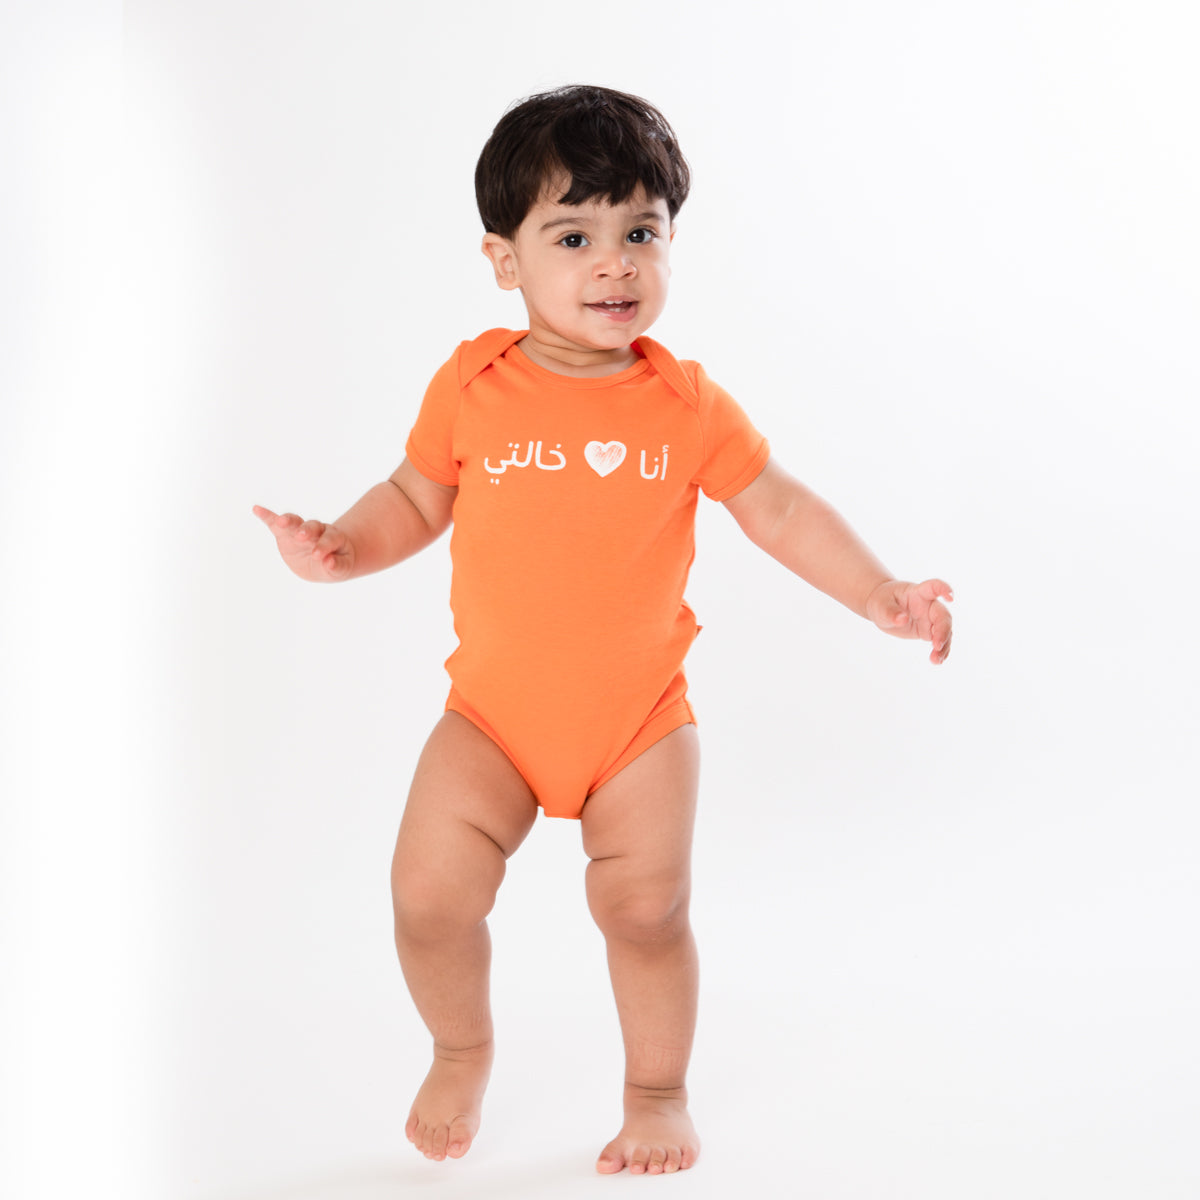 Organic onesie with Arabic text &quot;I LOVE MY AUNTIE&quot; mom&#39;s side - Baby Elephant Organic Wear